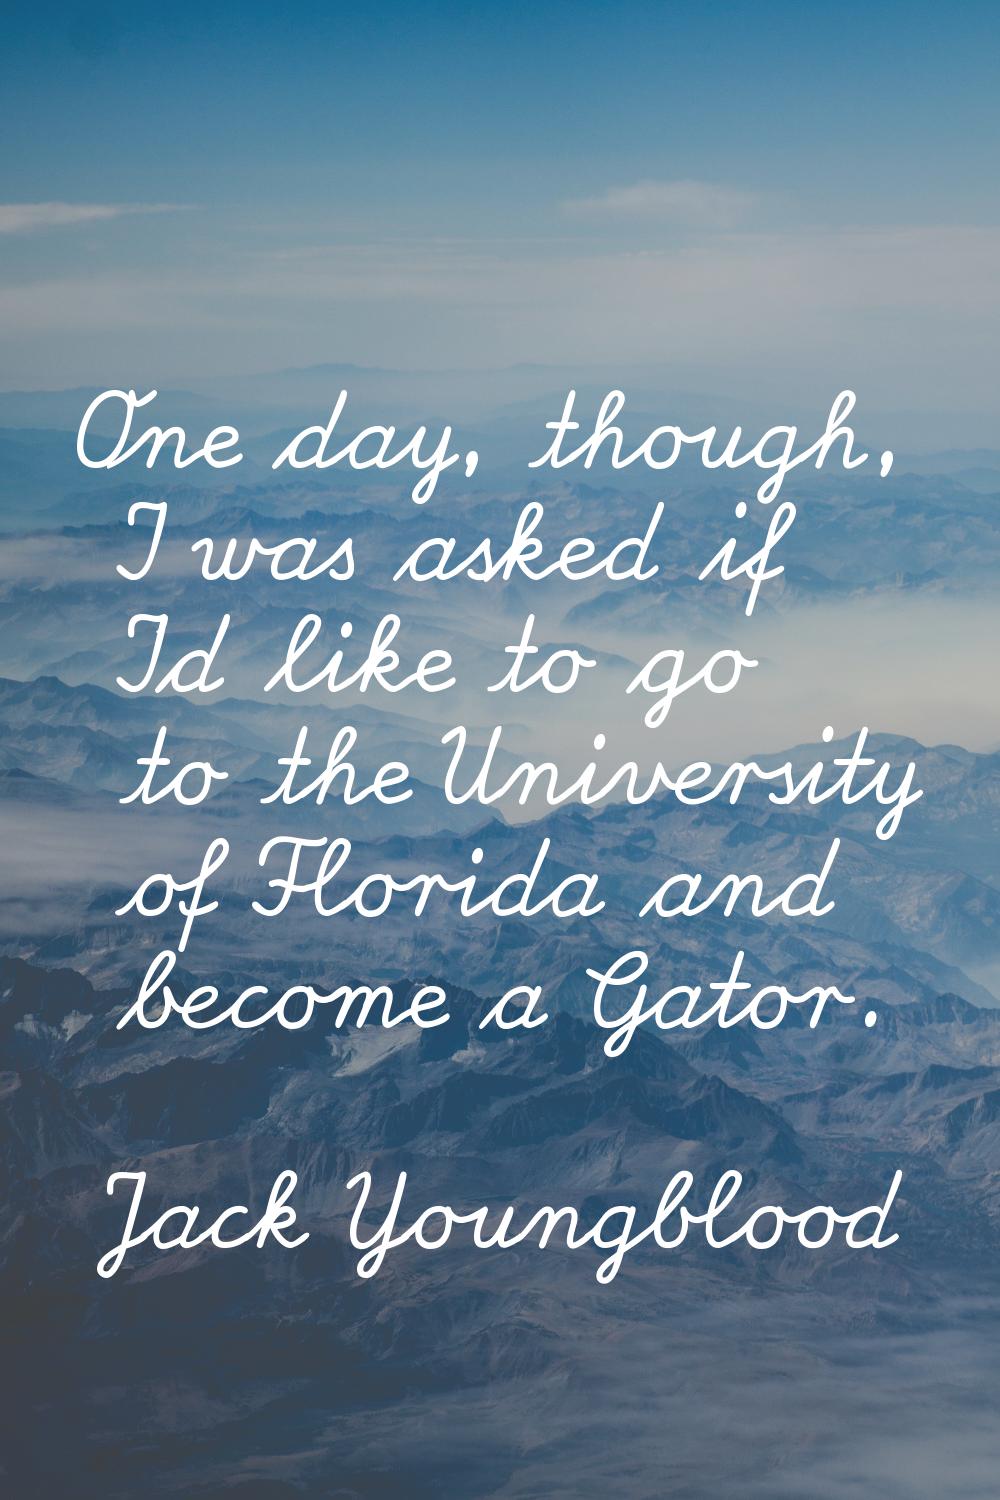 One day, though, I was asked if I'd like to go to the University of Florida and become a Gator.